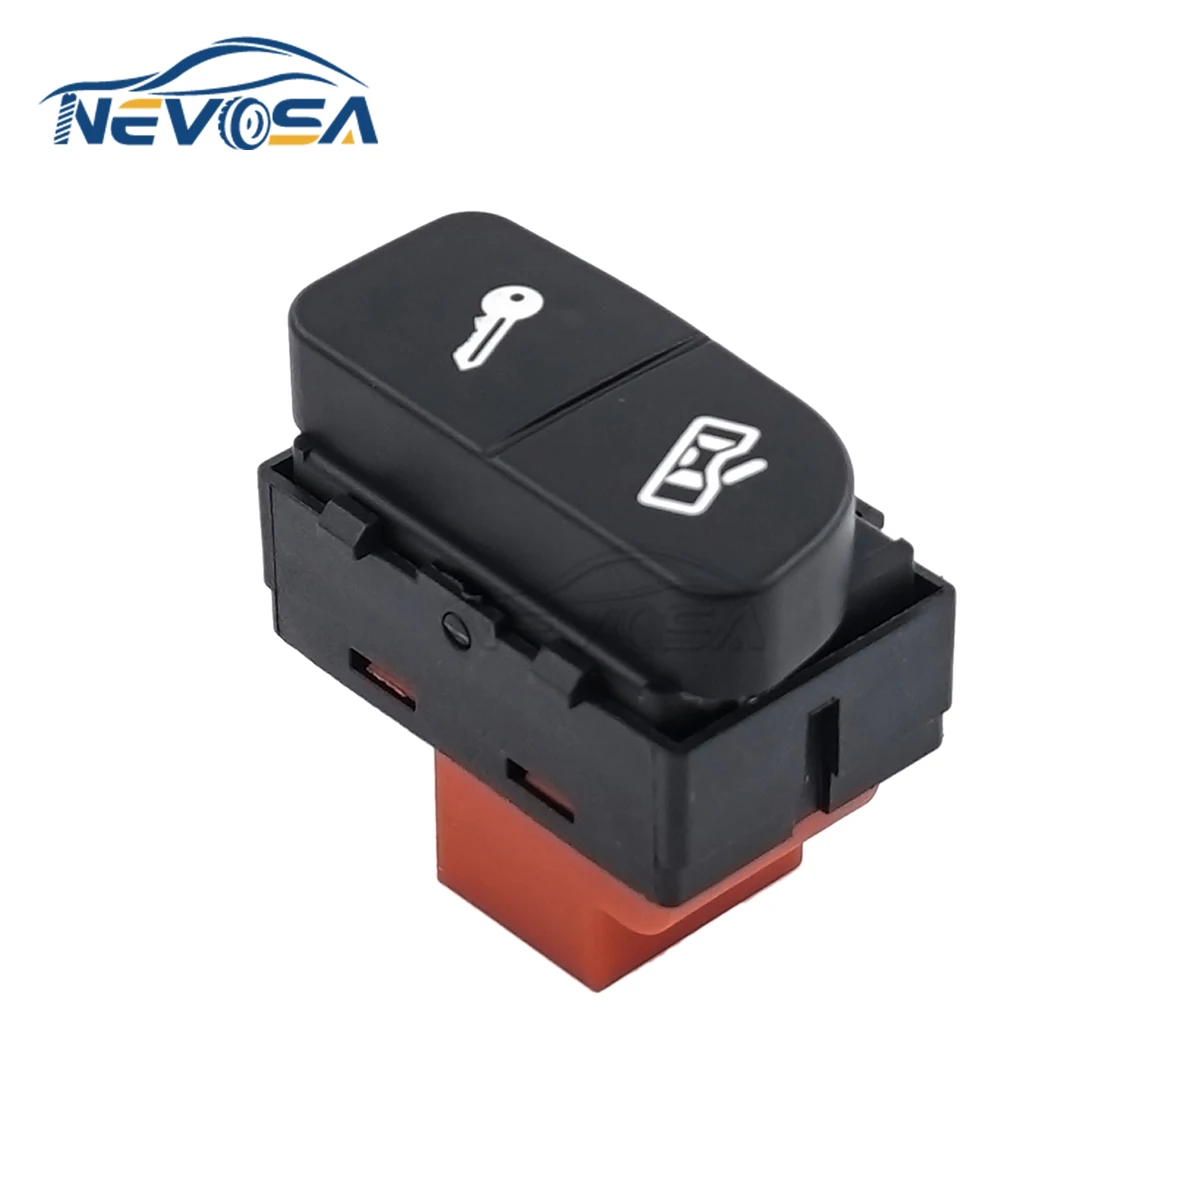 

NEVOSA 5Z0962125 Electric Front Left Central Door Locking Switch Button For Volkswagen VW Fox Africa 2004-2010 Car Accessories